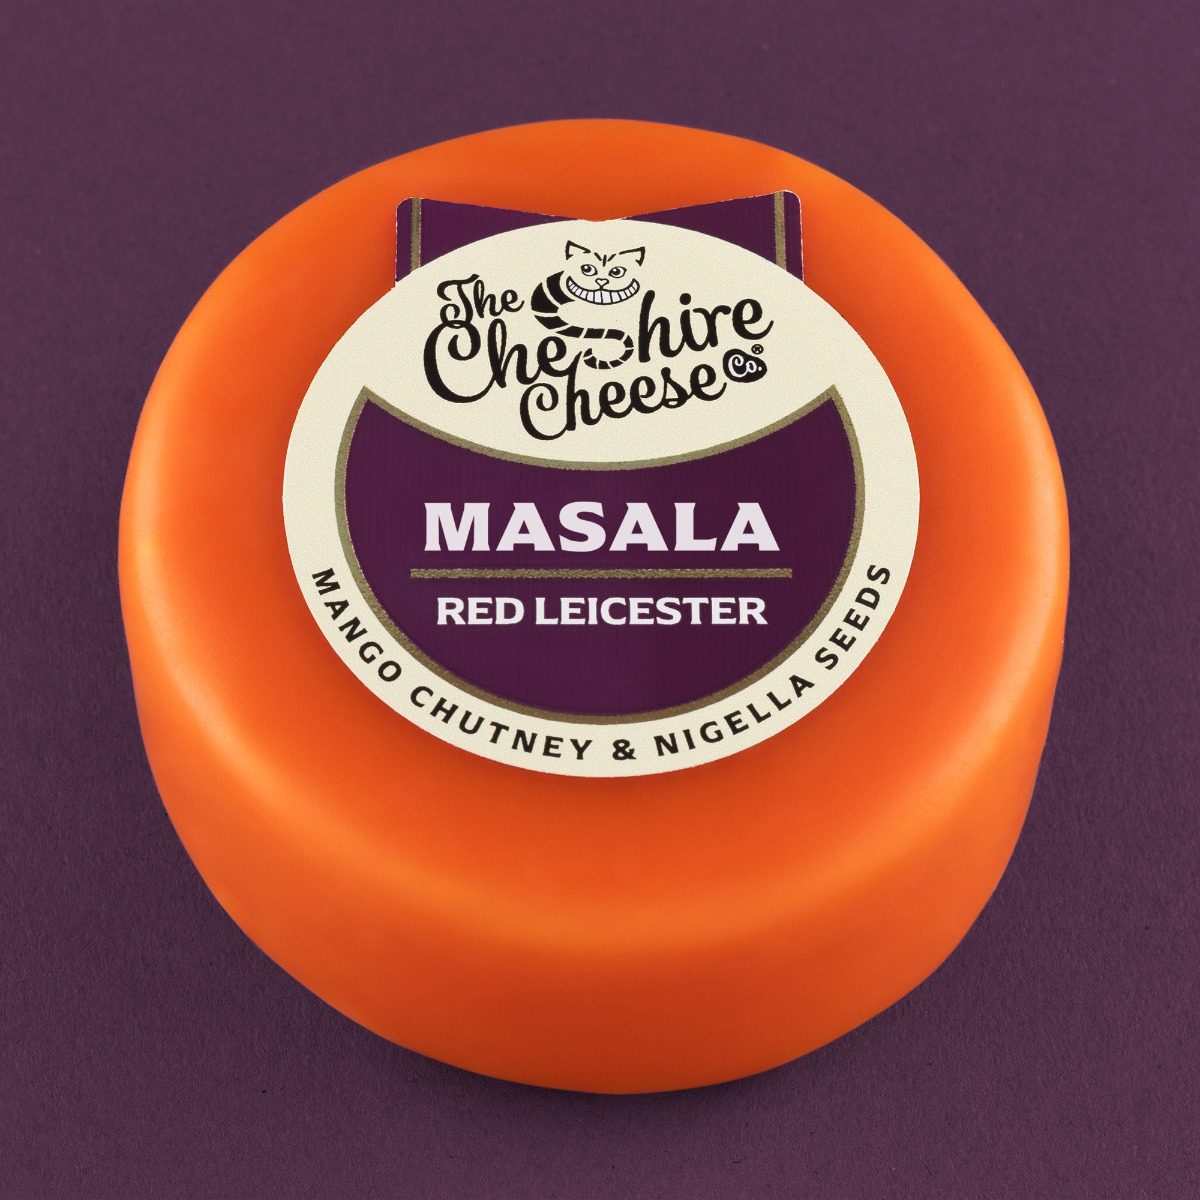 Masala Red Leicester Cheese